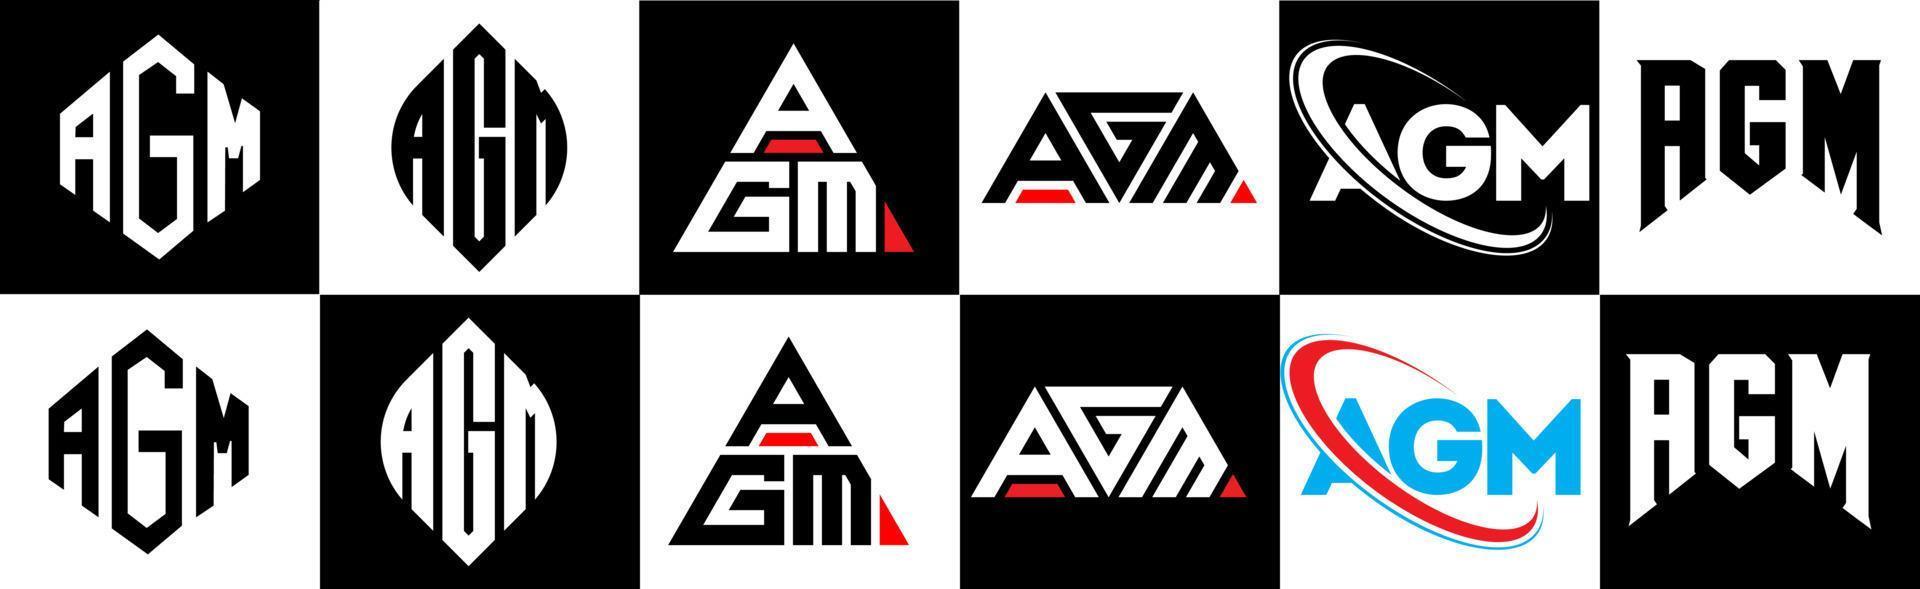 AGM letter logo design in six style. AGM polygon, circle, triangle, hexagon, flat and simple style with black and white color variation letter logo set in one artboard. AGM minimalist and classic logo vector